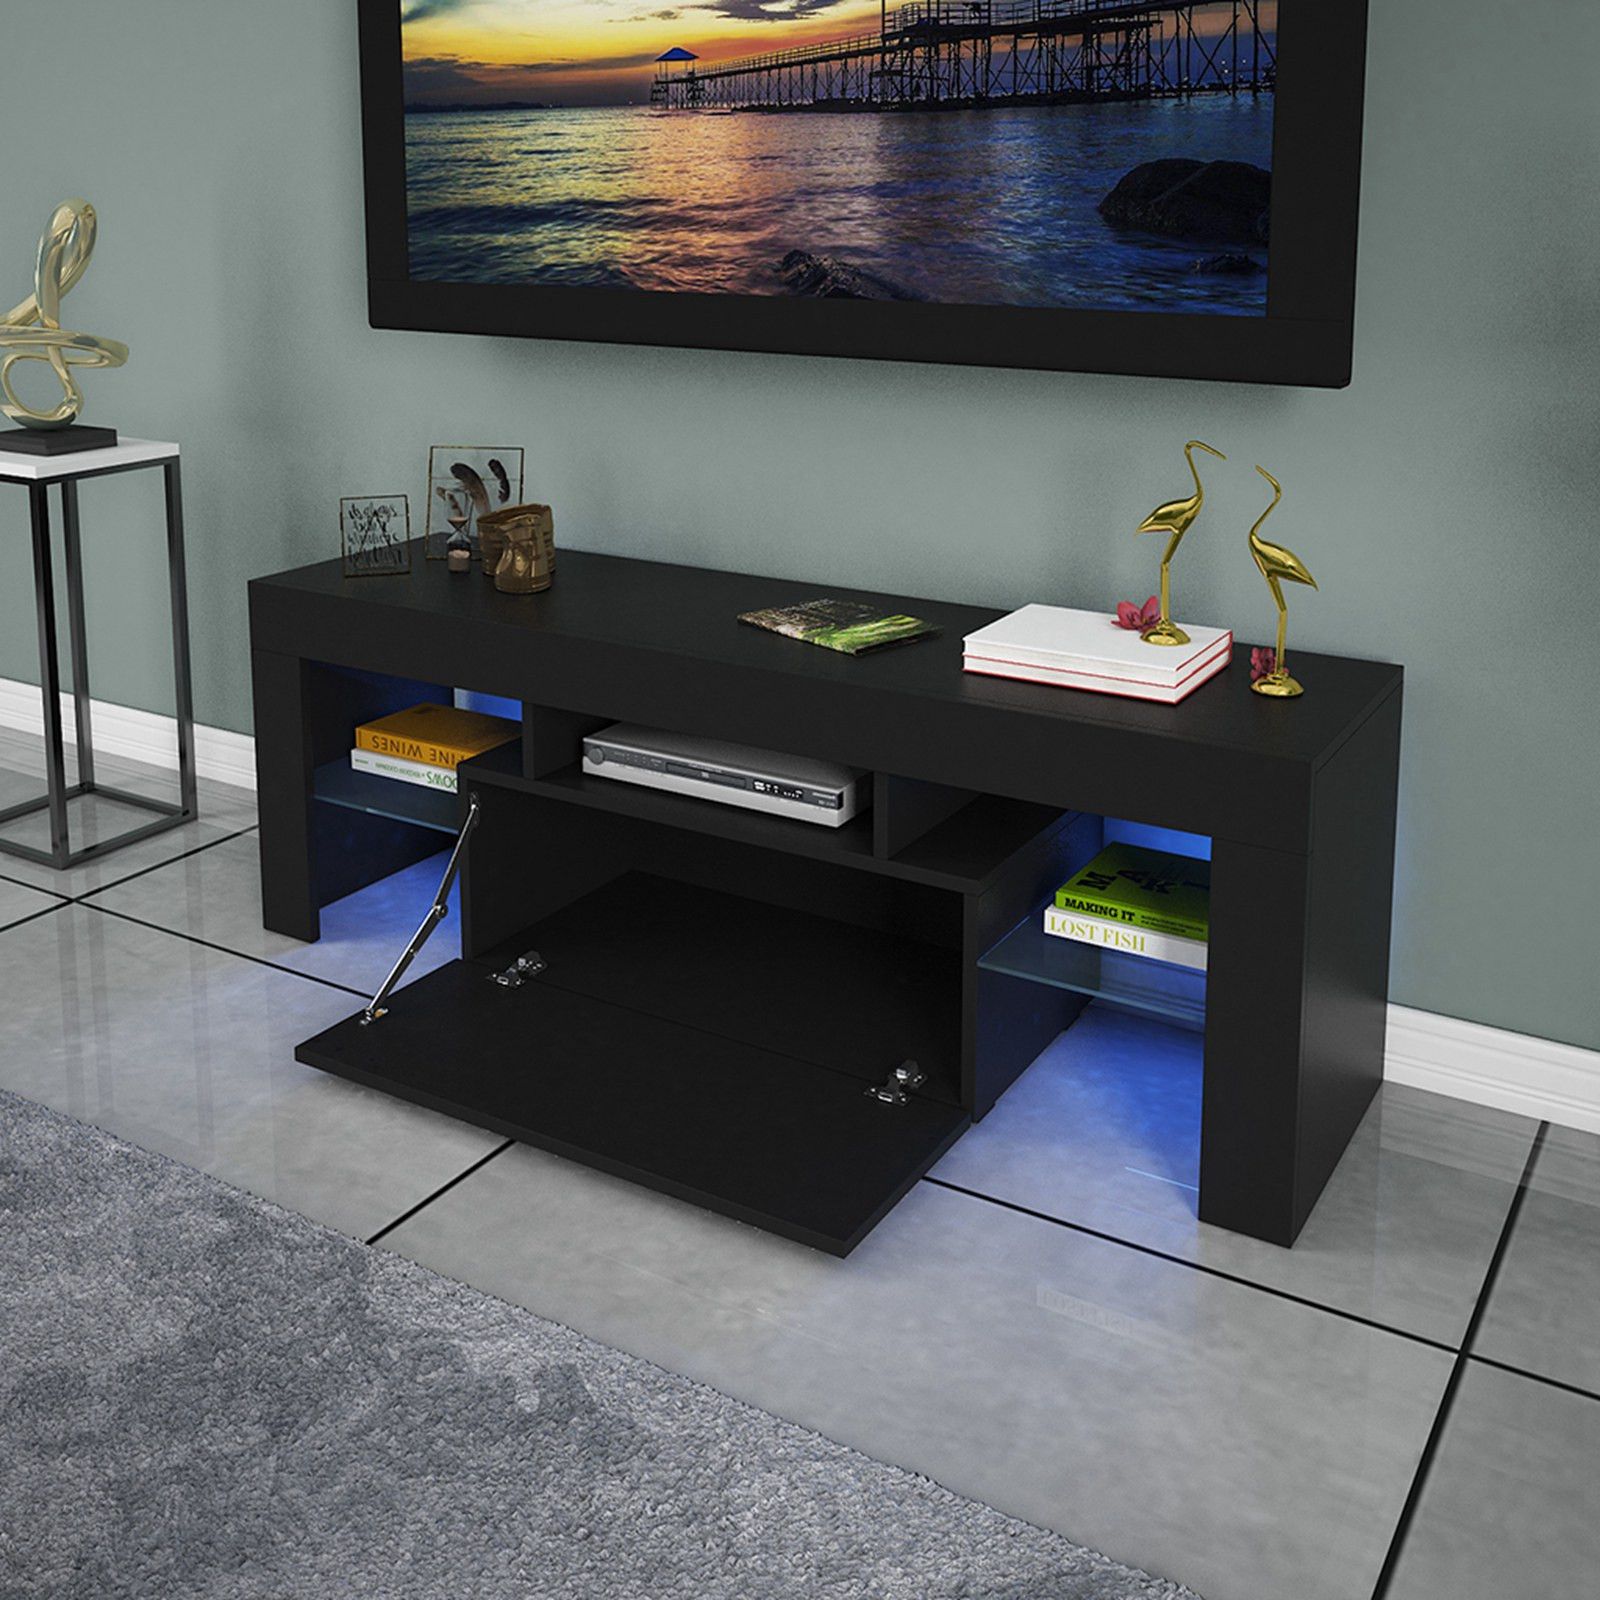 Lebonyard Tv Stand Cabinet With High Gloss Led Lights For Throughout Zimtown Tv Stands With High Gloss Led Lights (View 11 of 15)